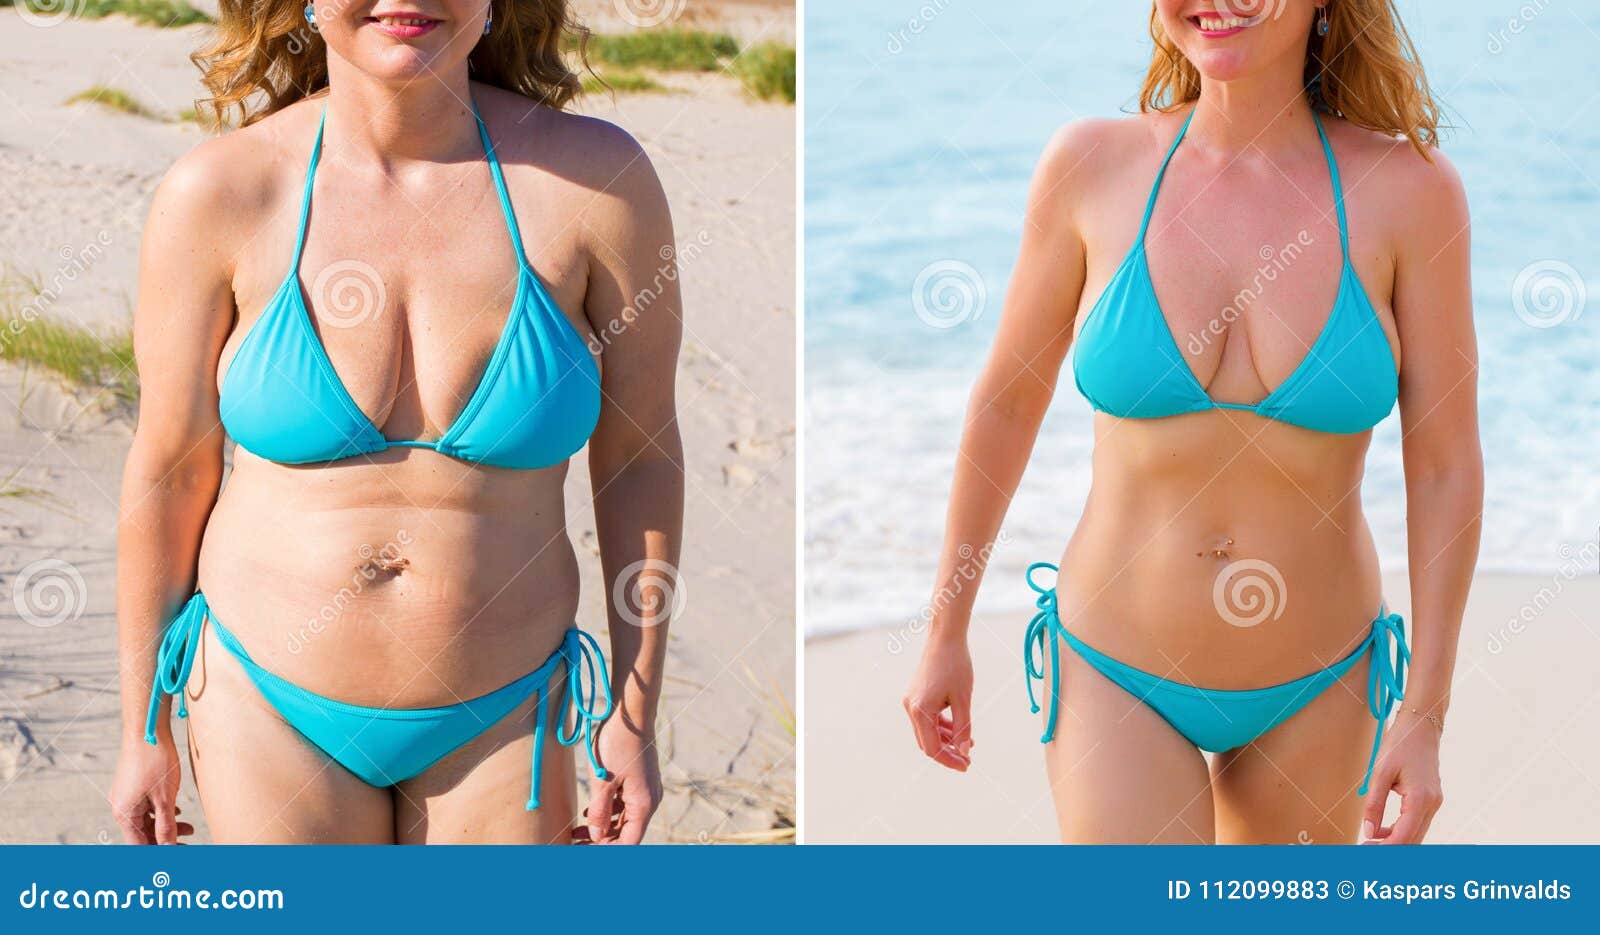 vragenlijst Comorama Mededogen Woman before and after Weight Loss Success Stock Image - Image of fitness,  losing: 112099883